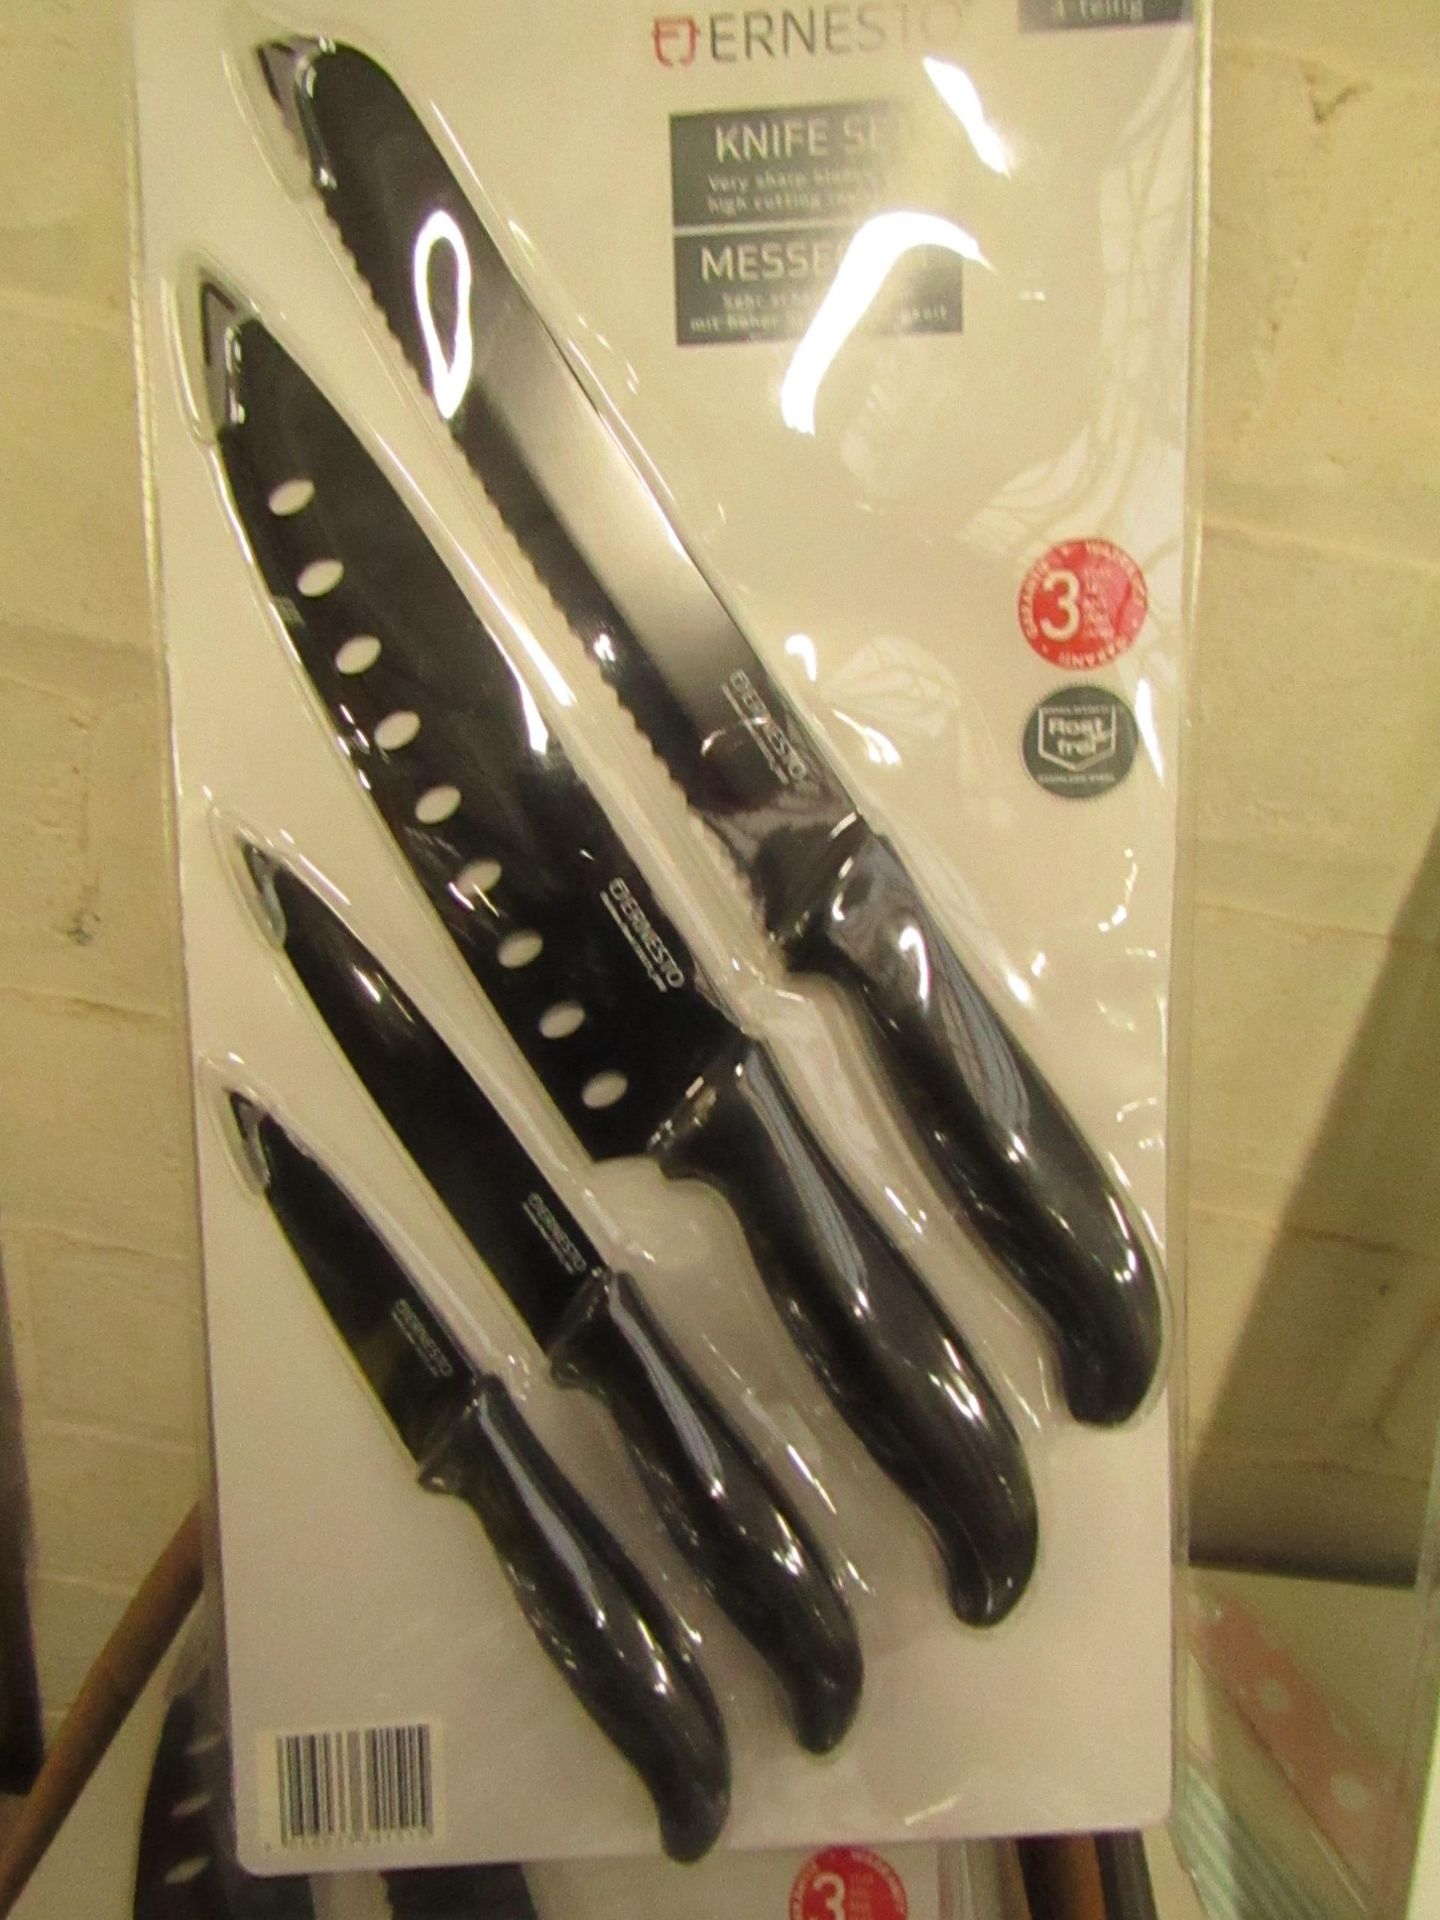 Ernesto 4 piece knife set, new and packaged.